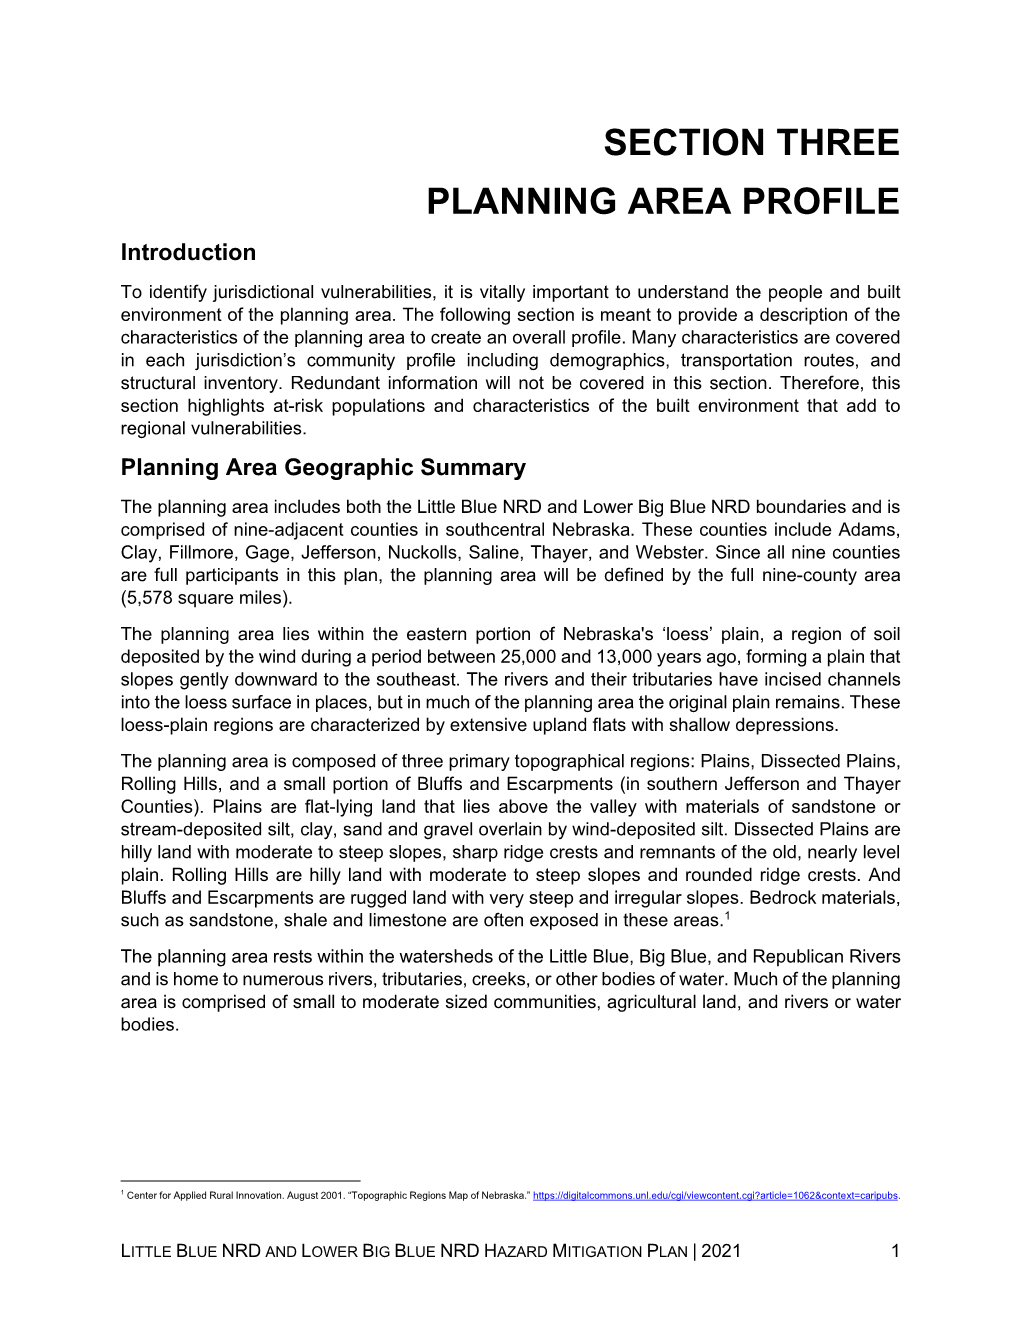 SECTION THREE PLANNING AREA PROFILE Introduction